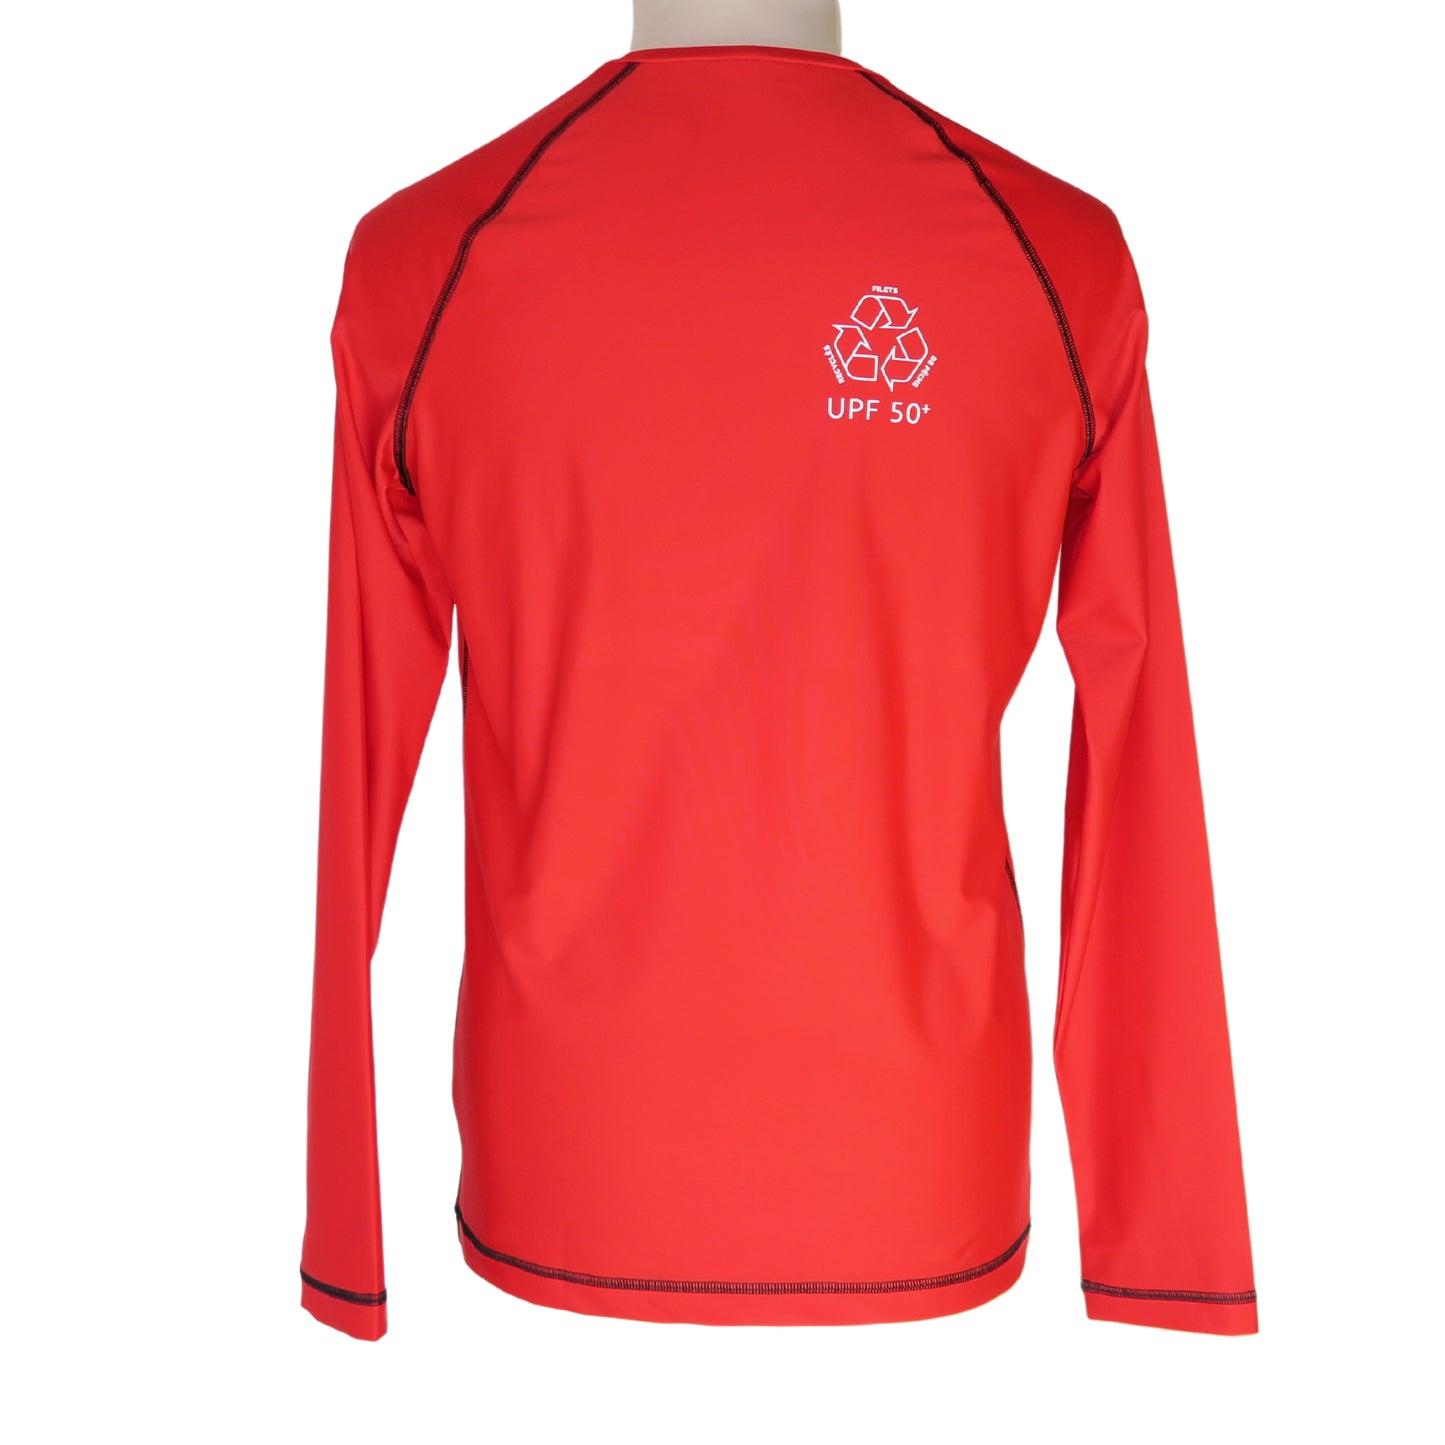 Men rashguard made in France from ghostnets red